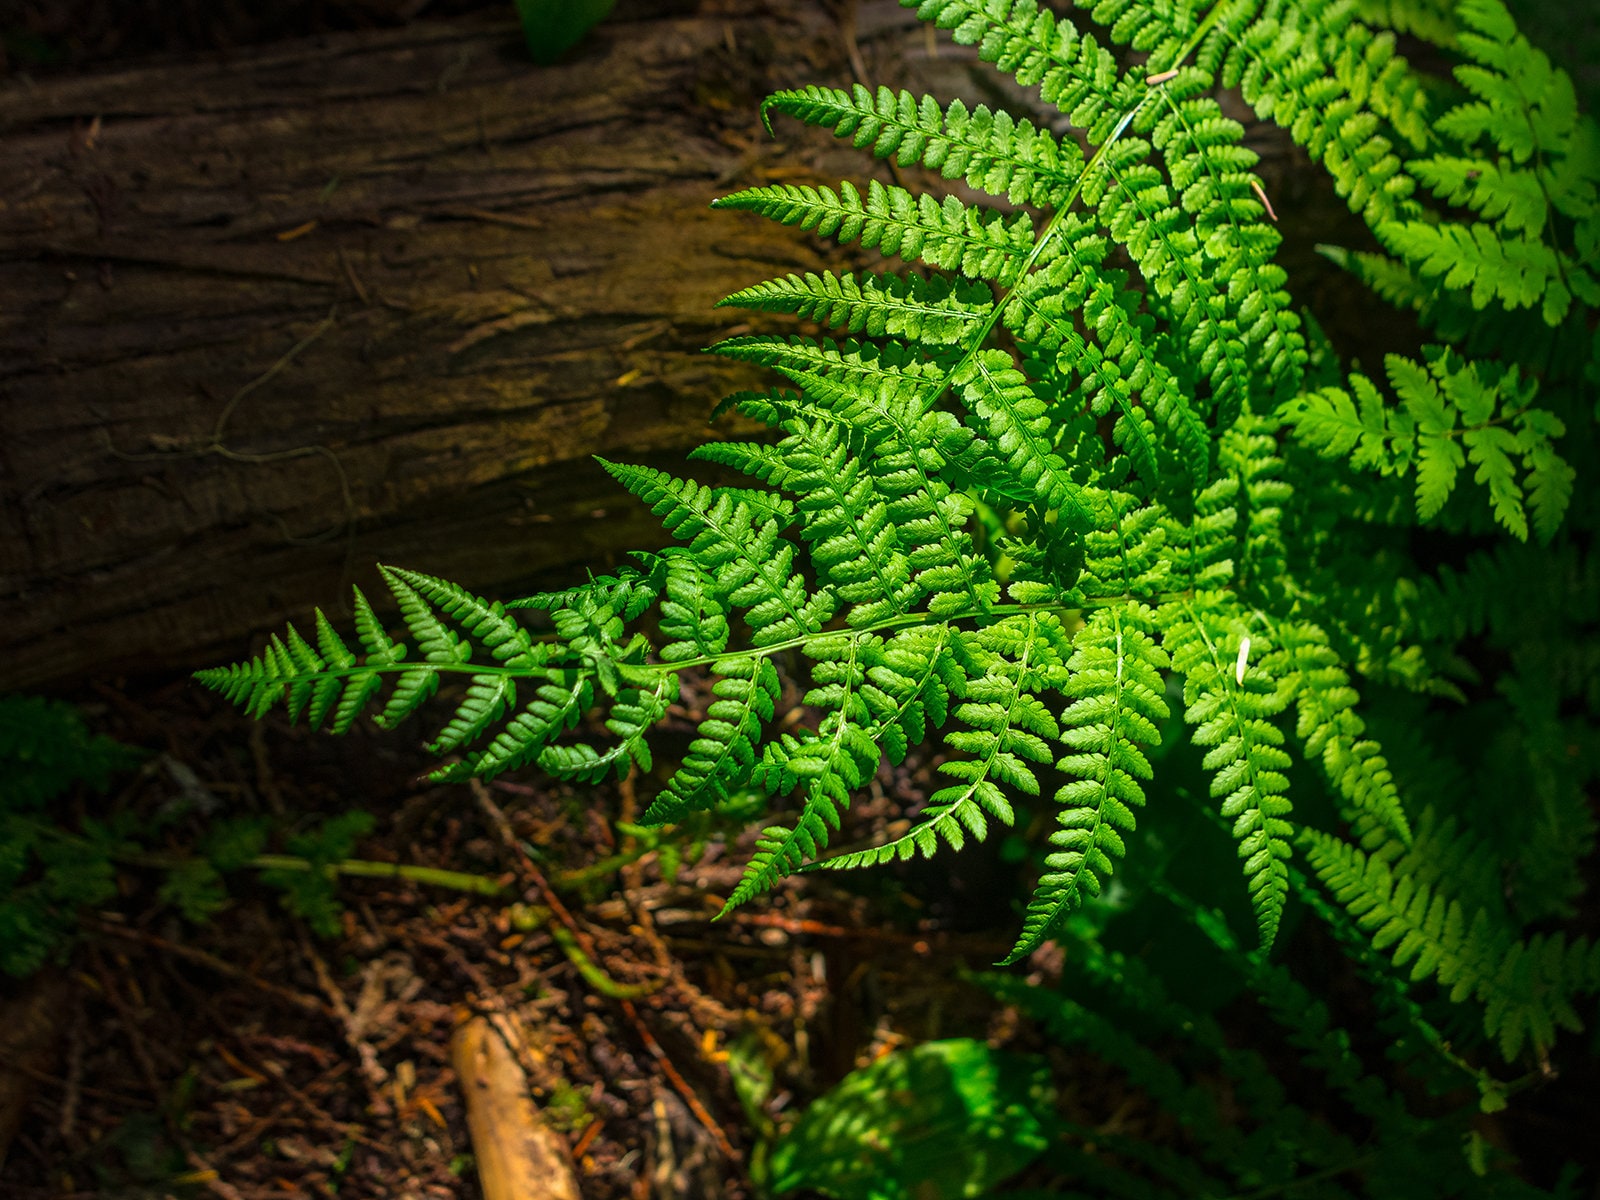 Glowing Green Fern Nature Photography